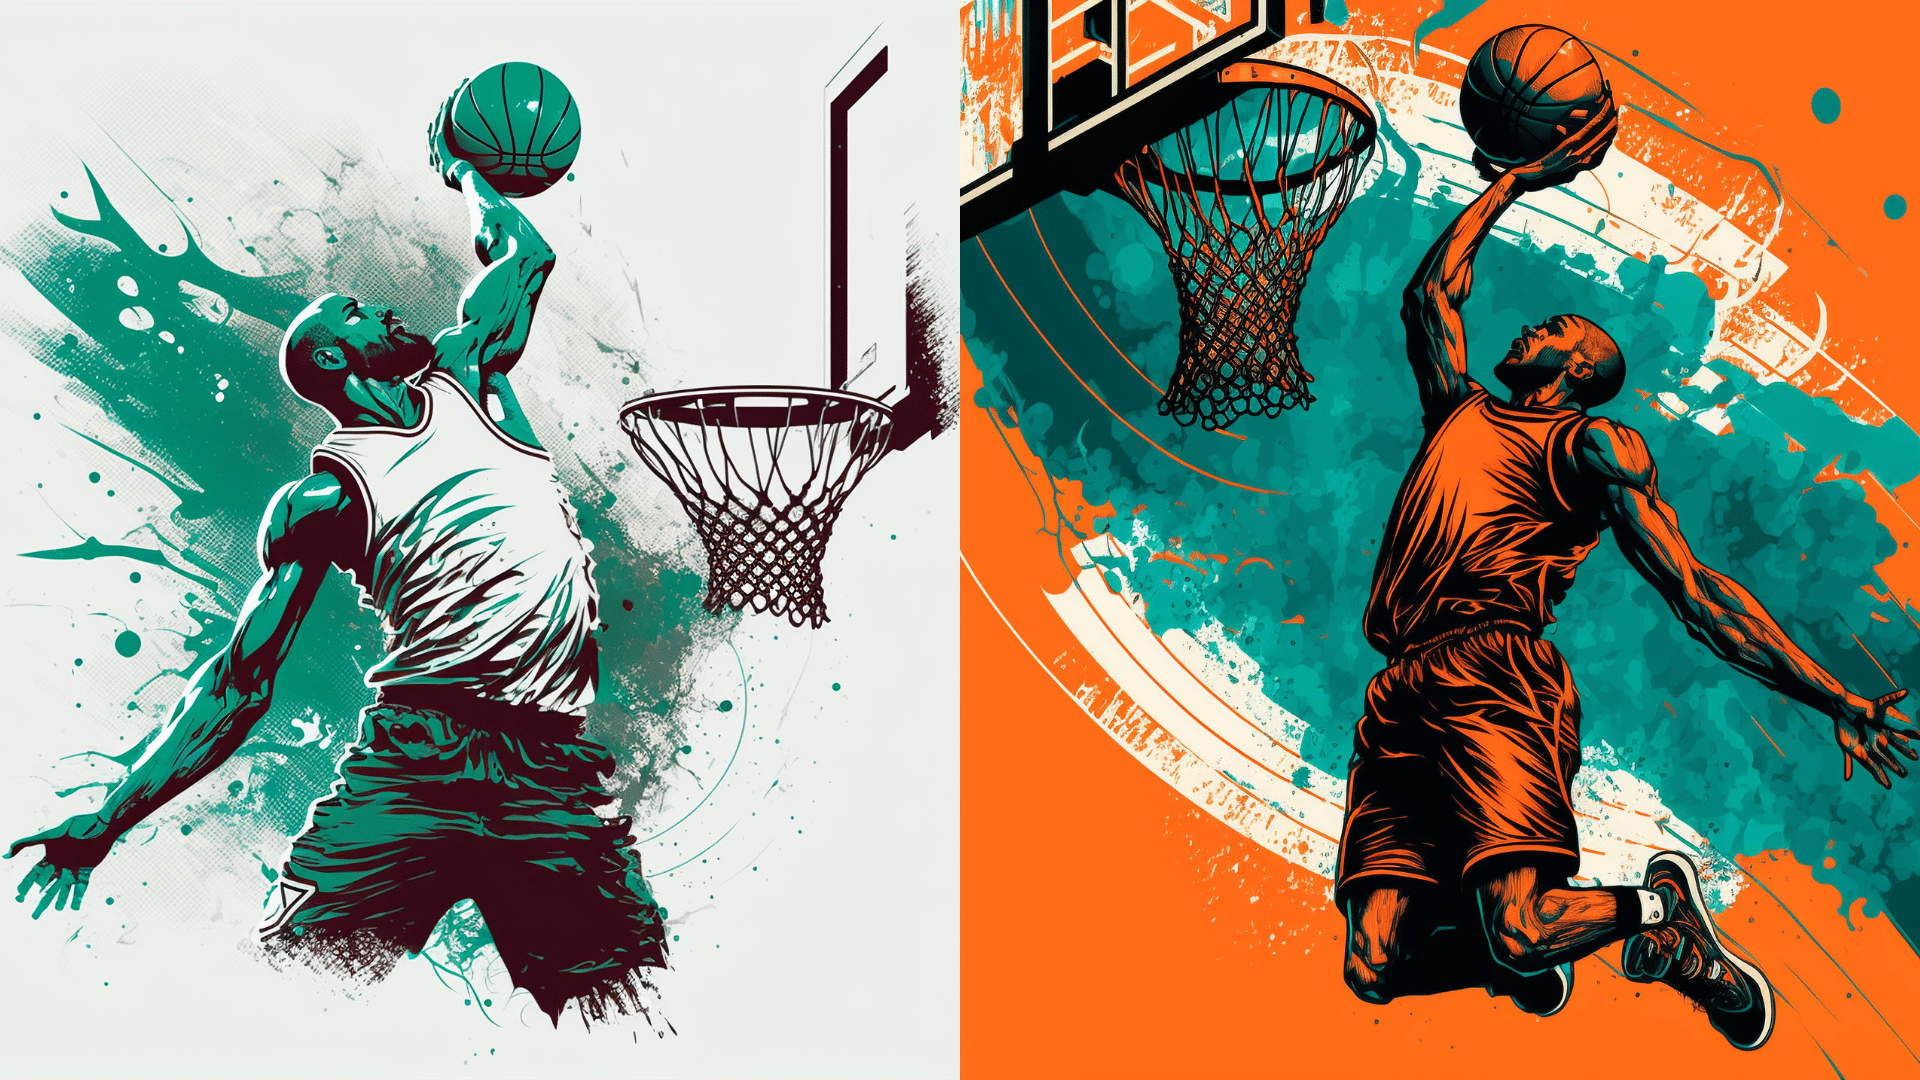 Michael Jordon Playing basketball graphic - How to Create Infographics that Are Cooler than Michael Jordan